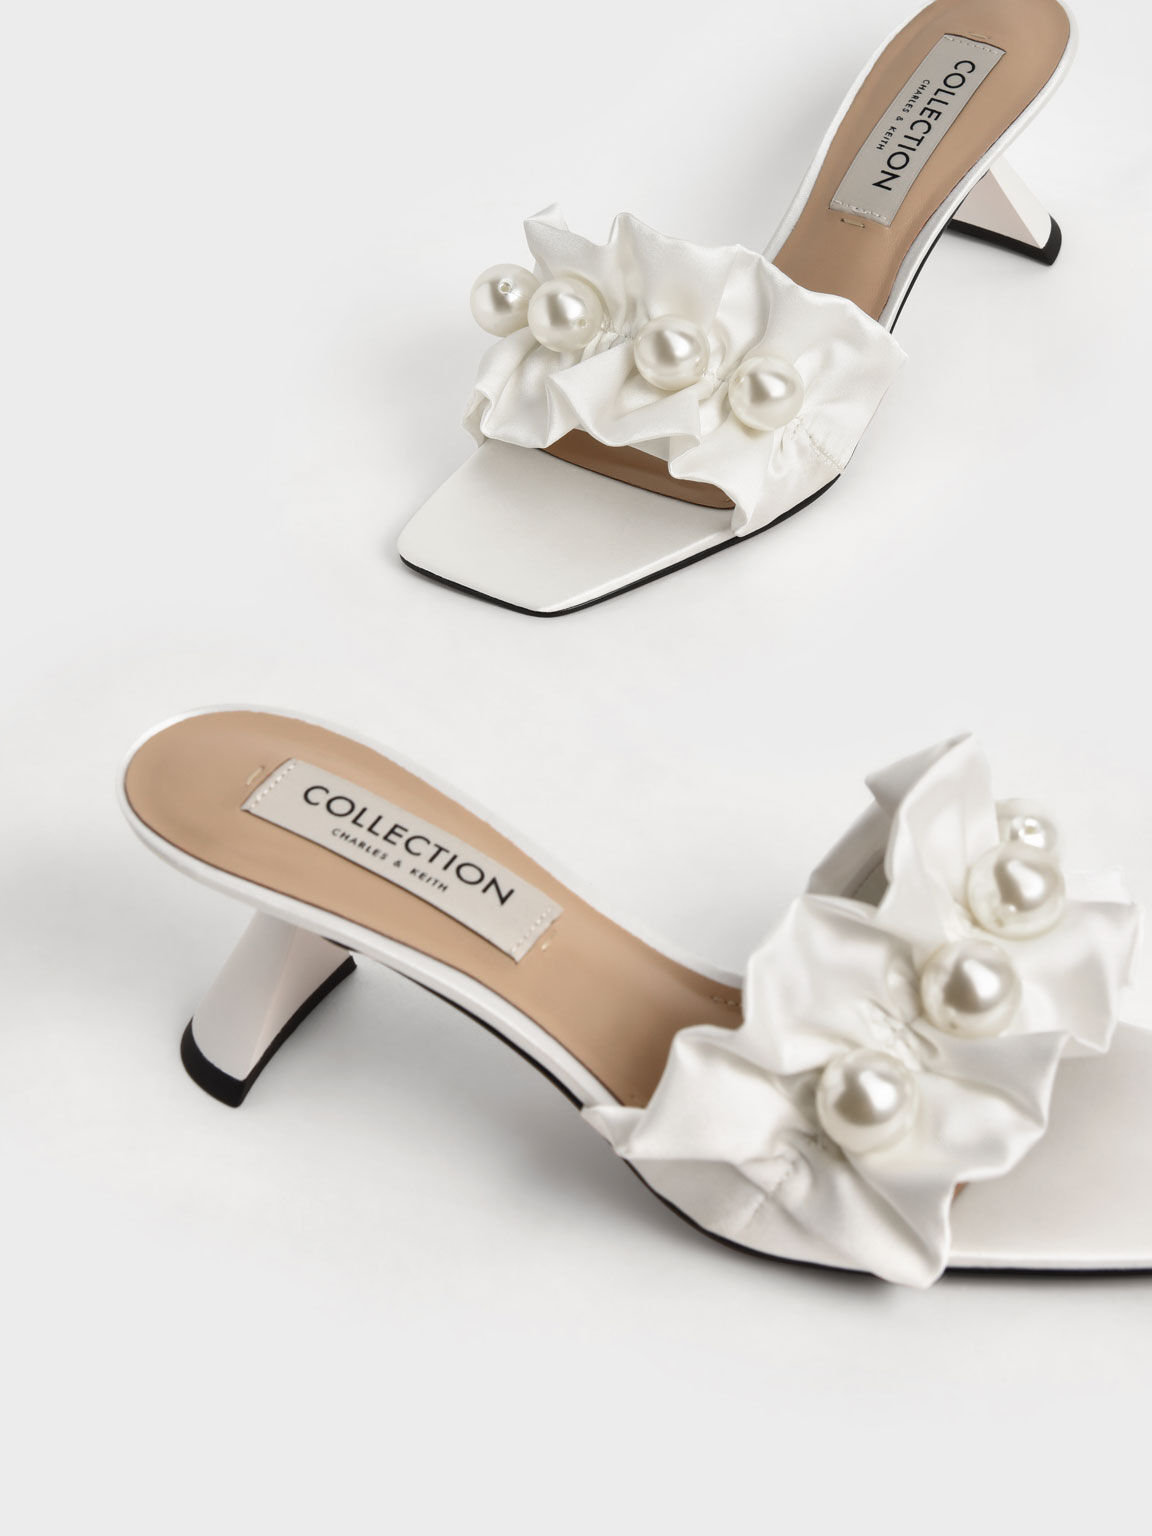 The Bridal Collection: Blythe Bead-Embellished Satin Mules, White, hi-res